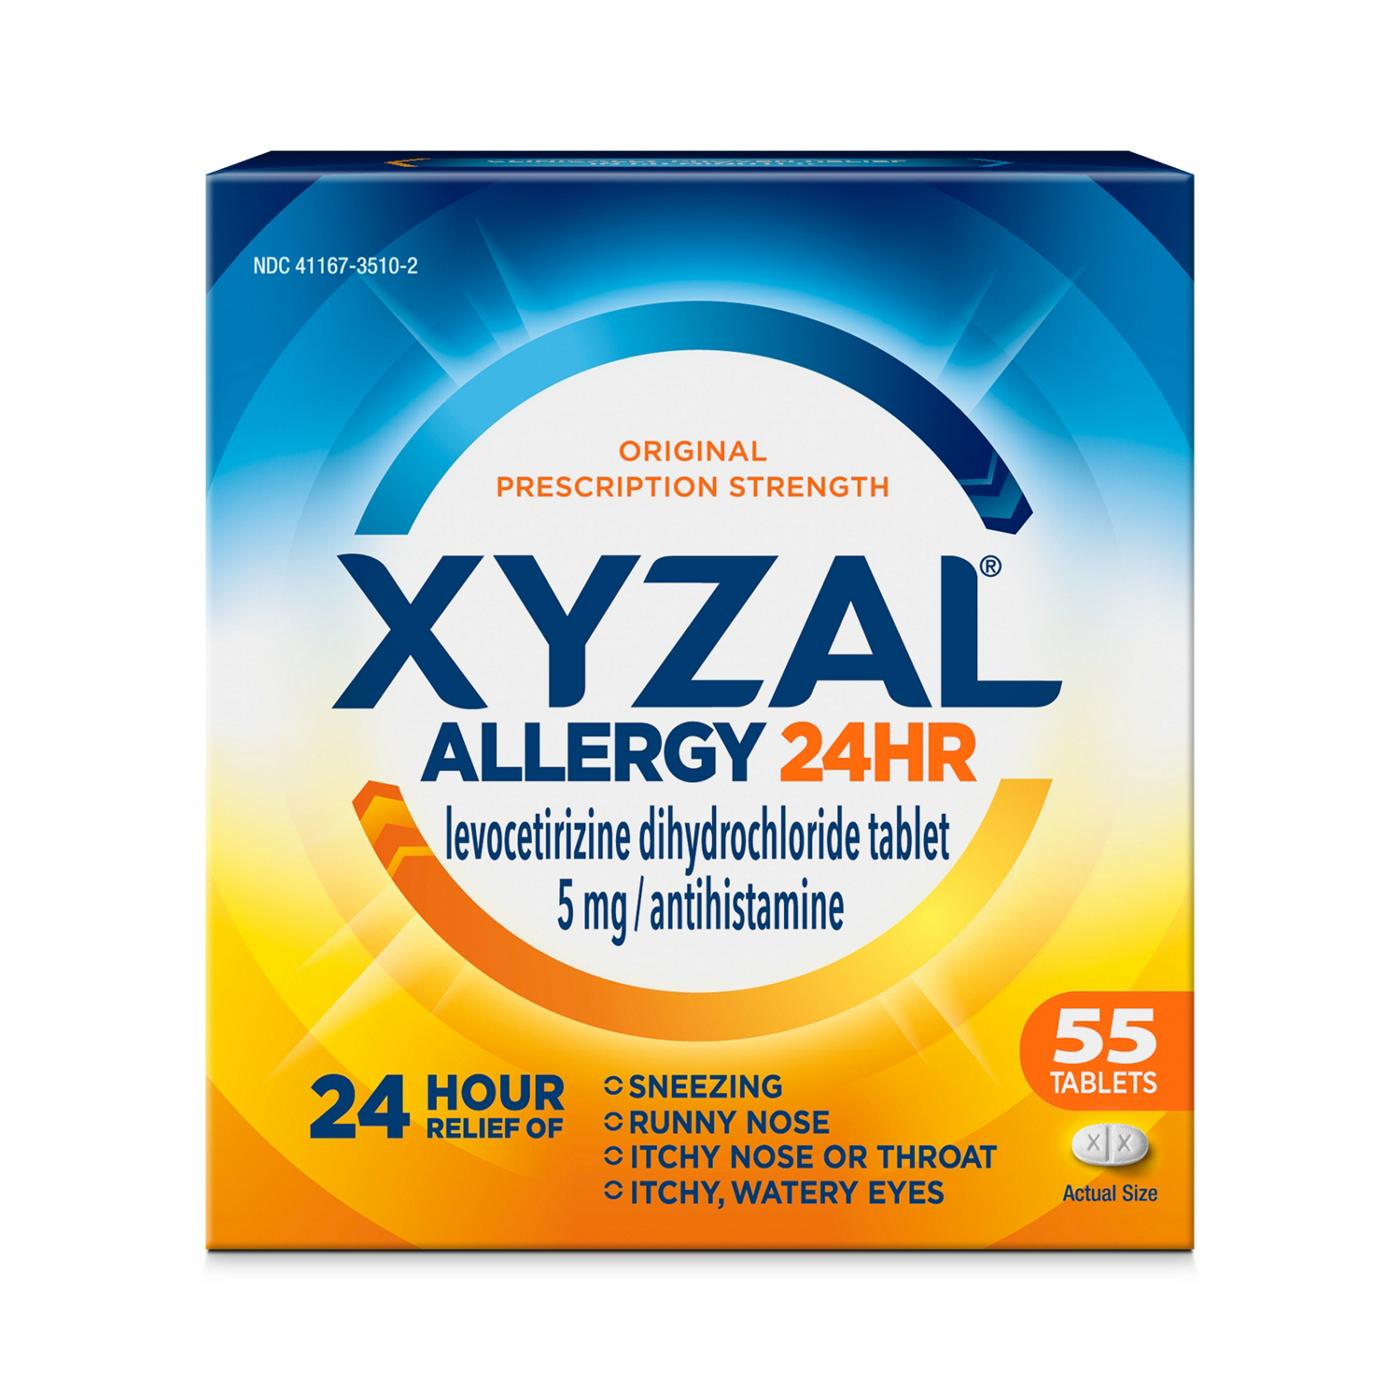 Xyzal Allergy 24 Hour Relief Tablets; image 1 of 5